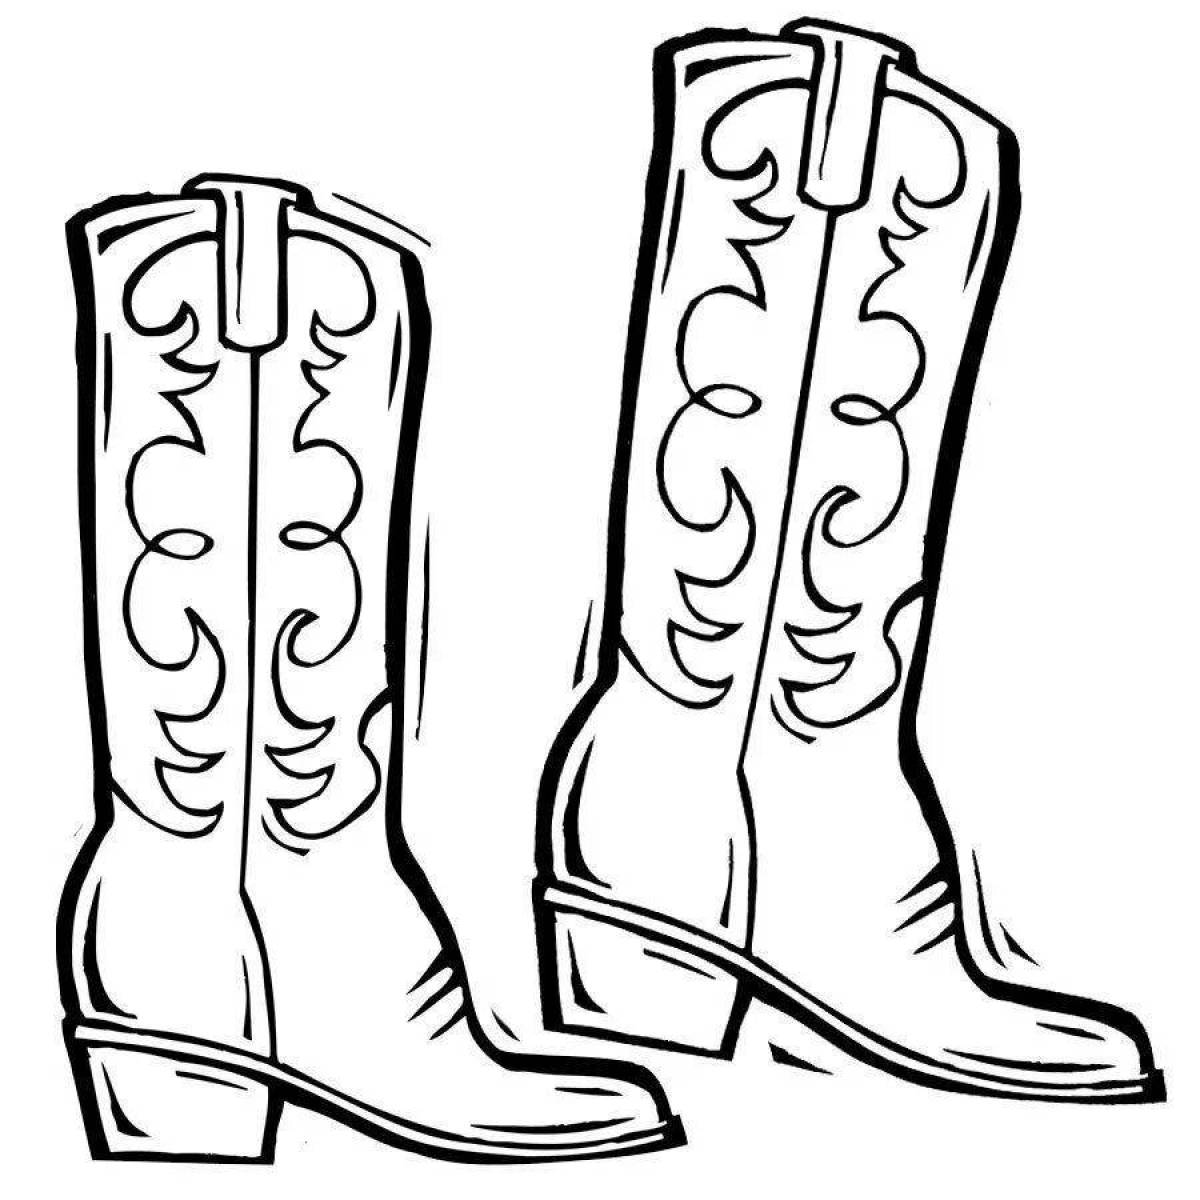 Colouring awesome winter boots